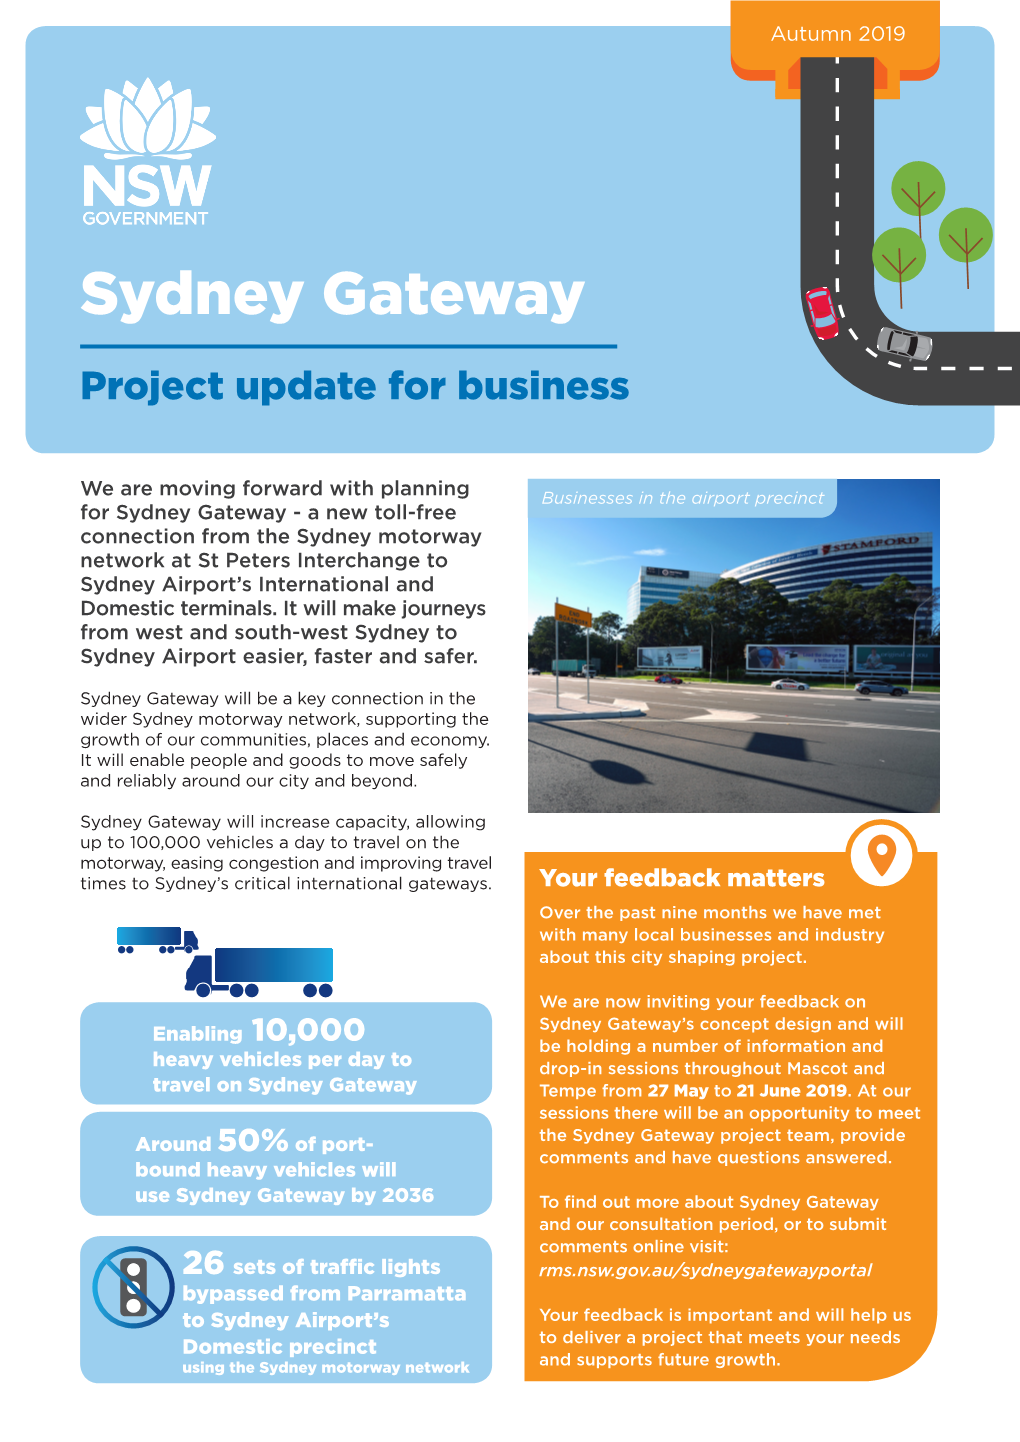 Sydney Gateway Project Update for Business